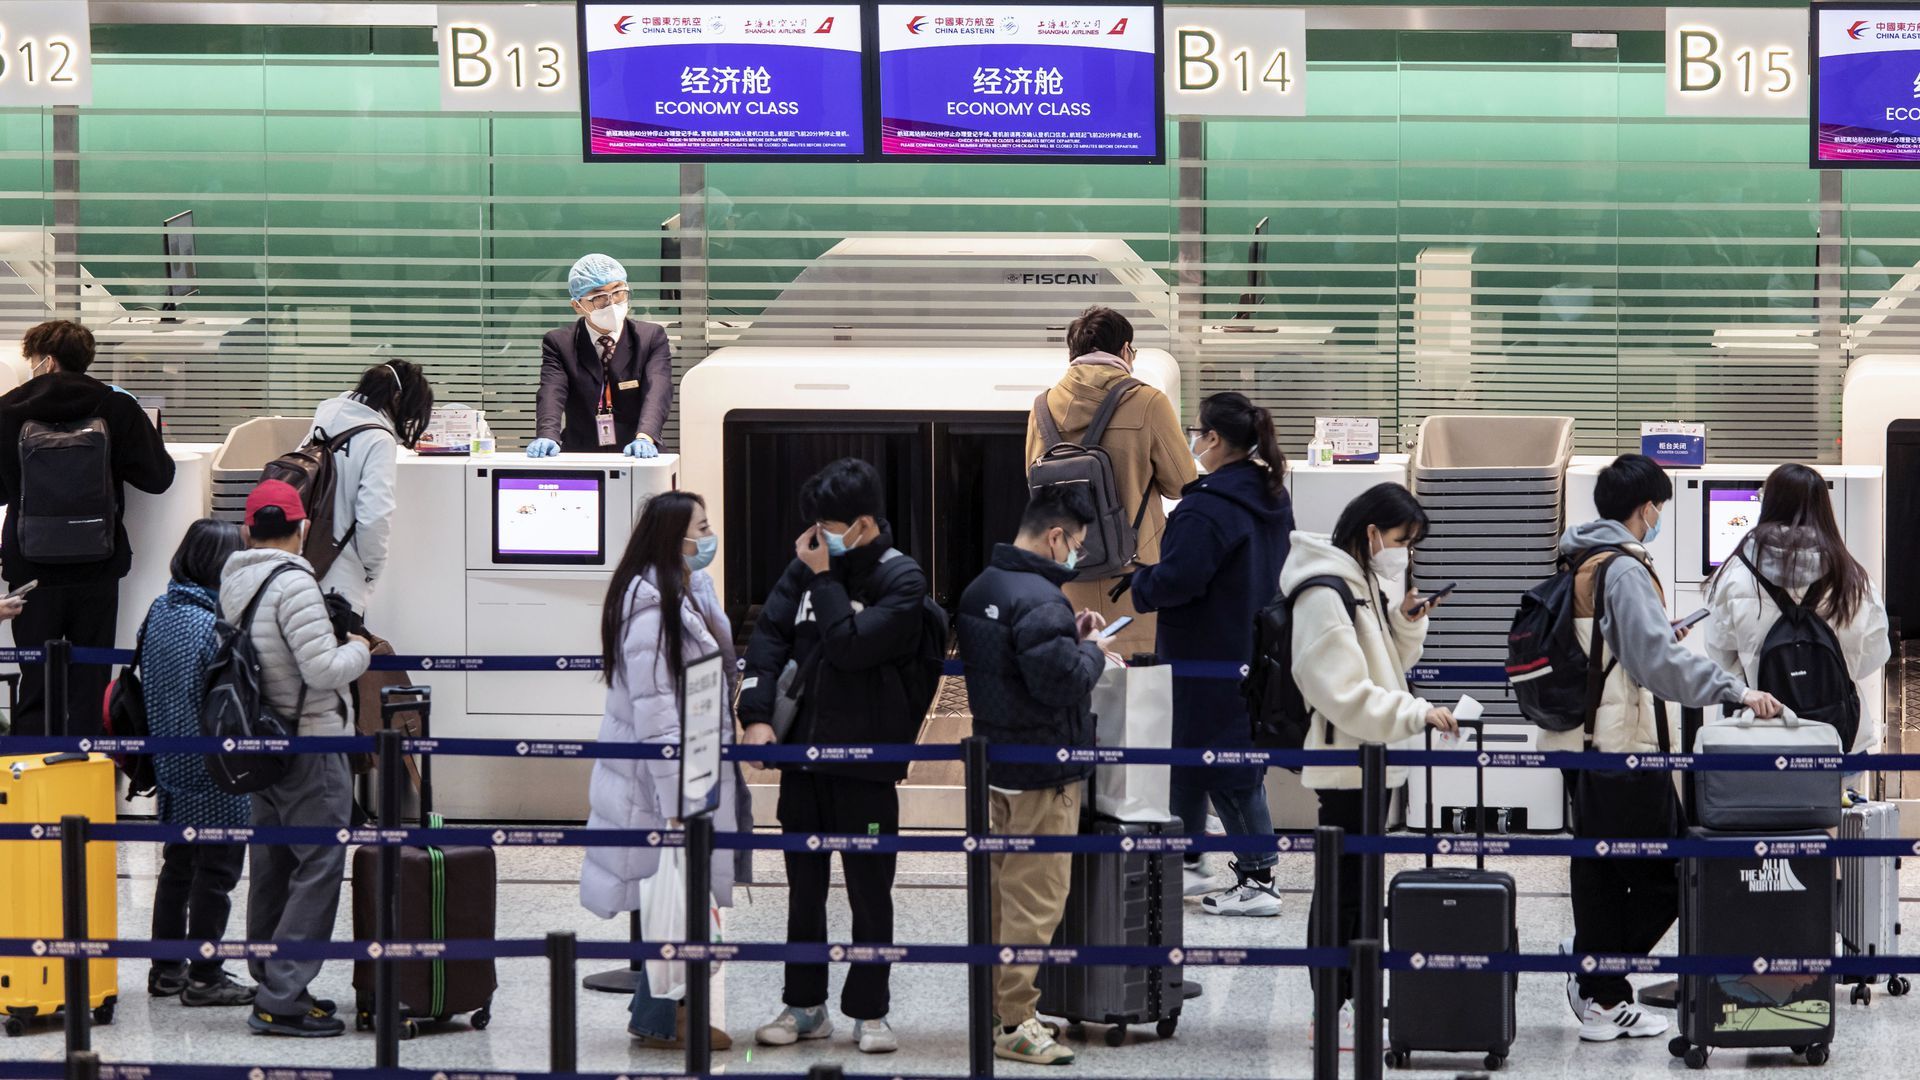 Travelers check in for a flight at the Hongqiao International Airport in Shanghai, China, on Dec. 12, 2022